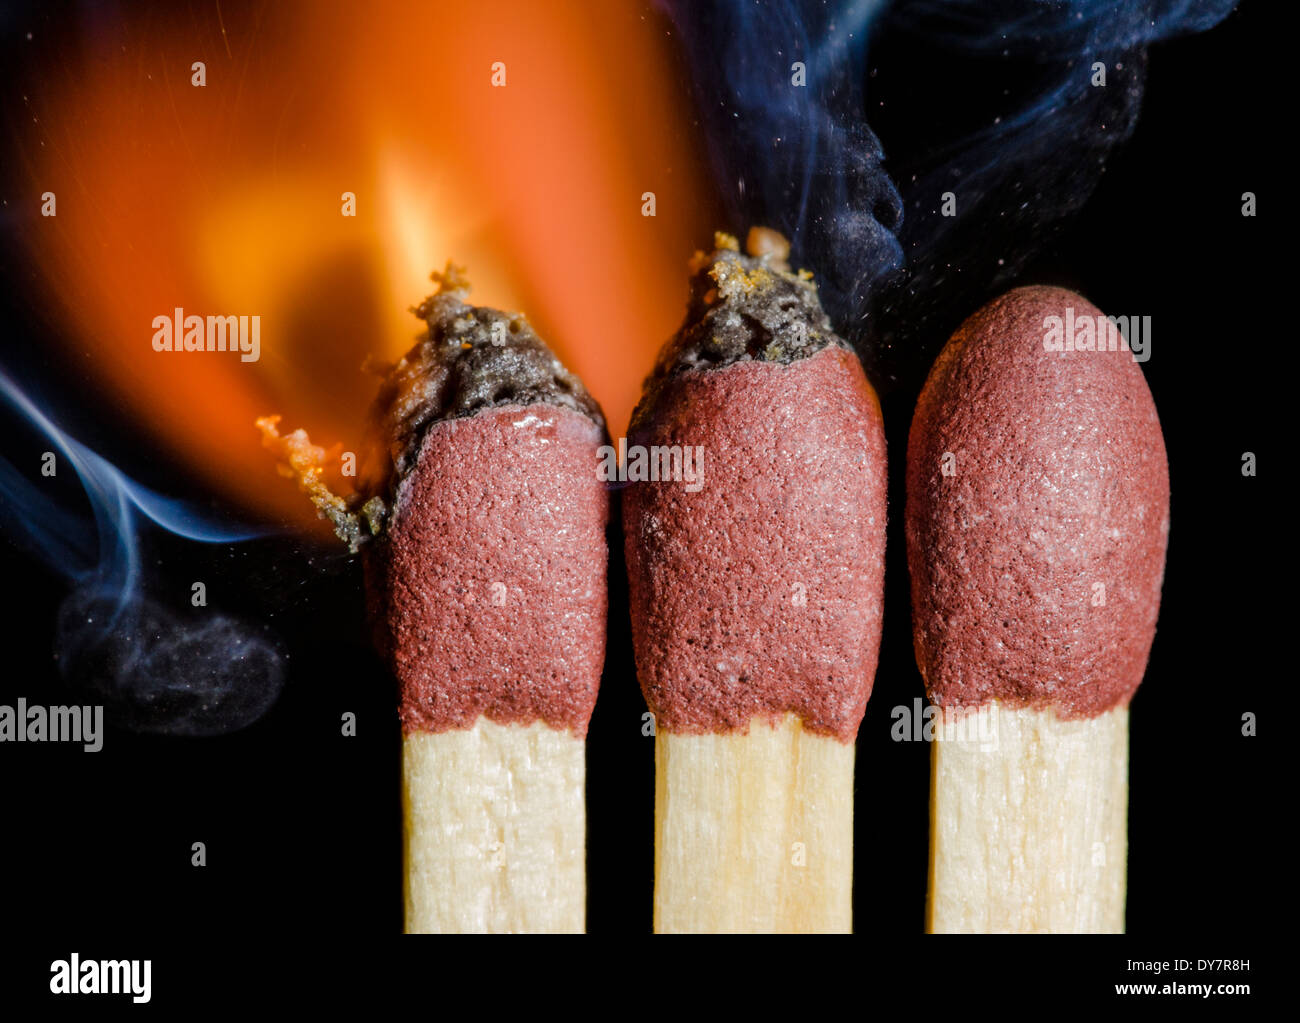 Matches being lit showing flames at the point of ignition, on a black background. Burning matches after being ignited. Stock Photo